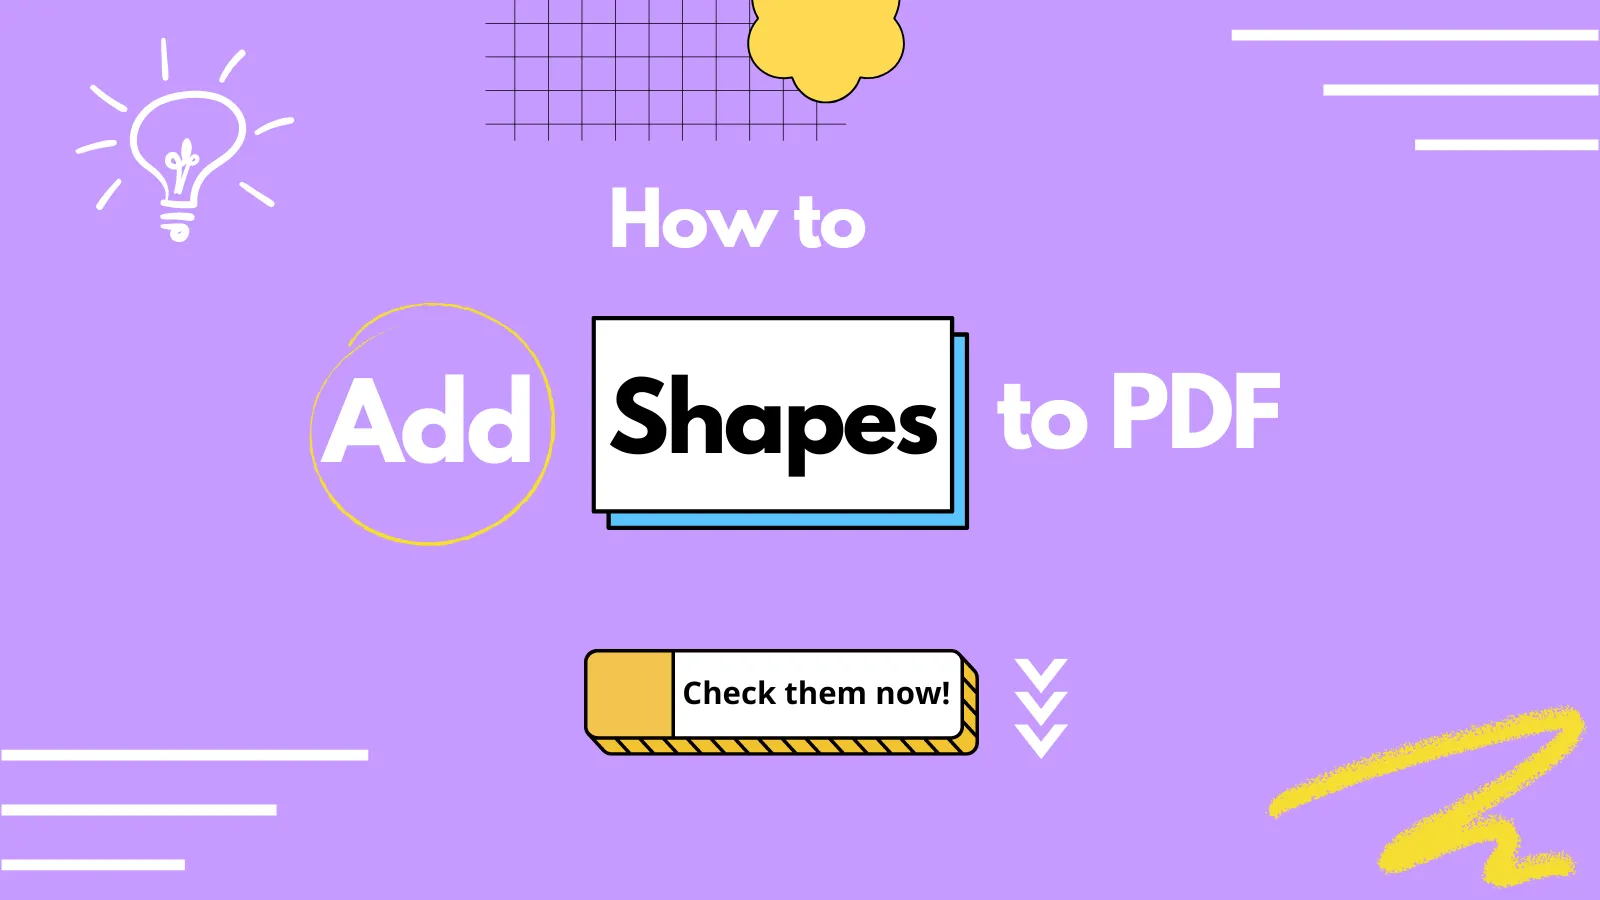 How to Add Shapes to PDF in a Few Steps